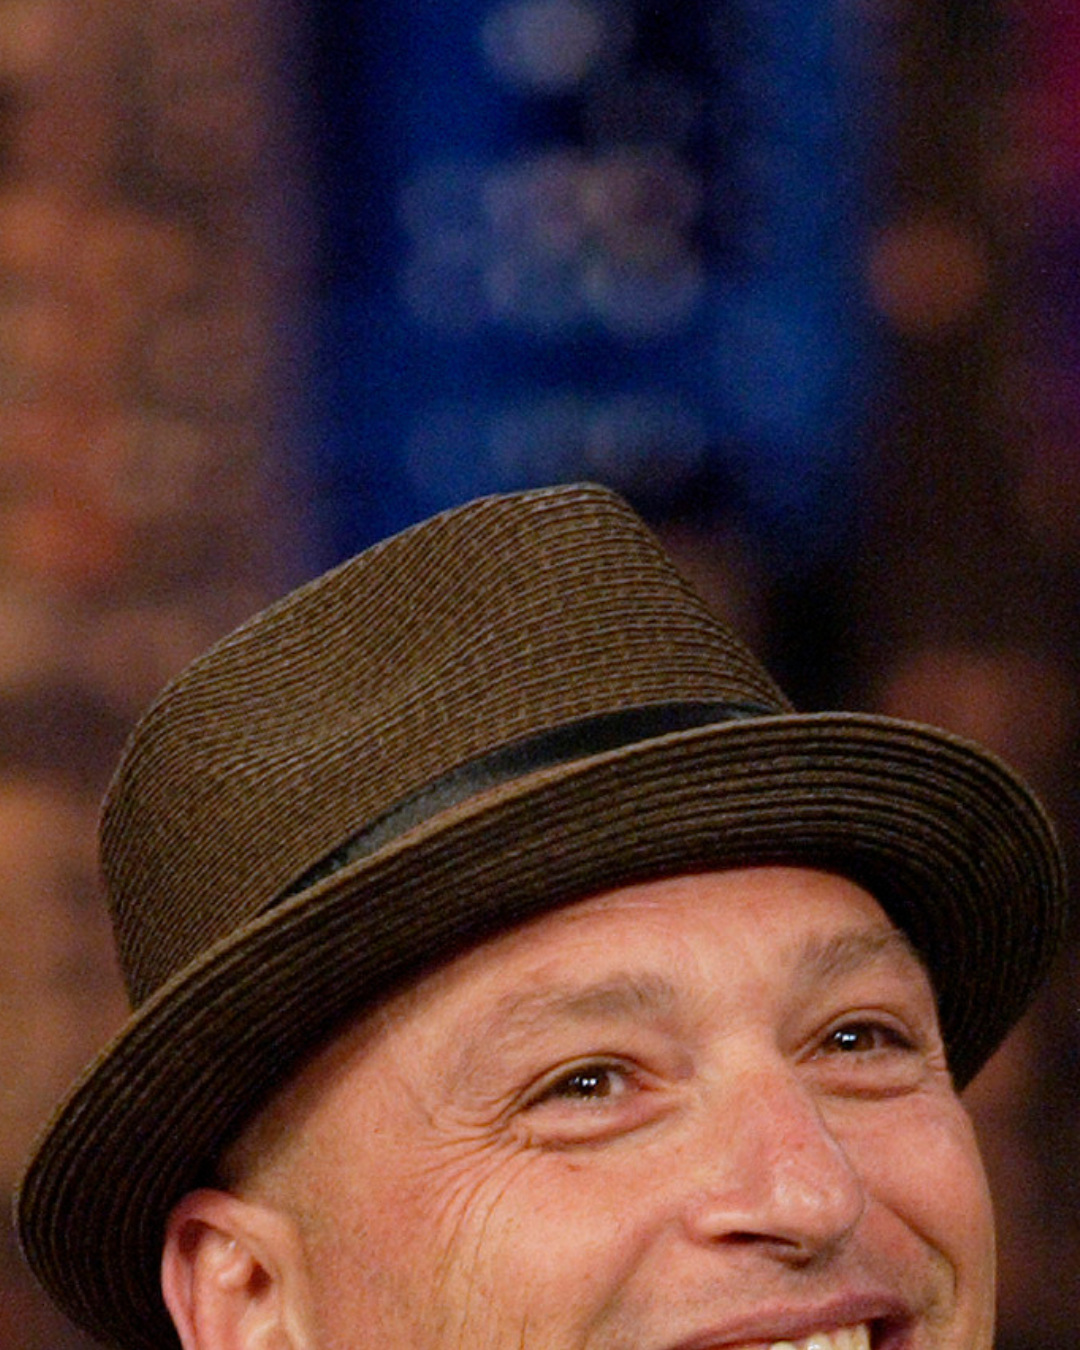 A close-up image of Howie Mandel&#x27;s fedora